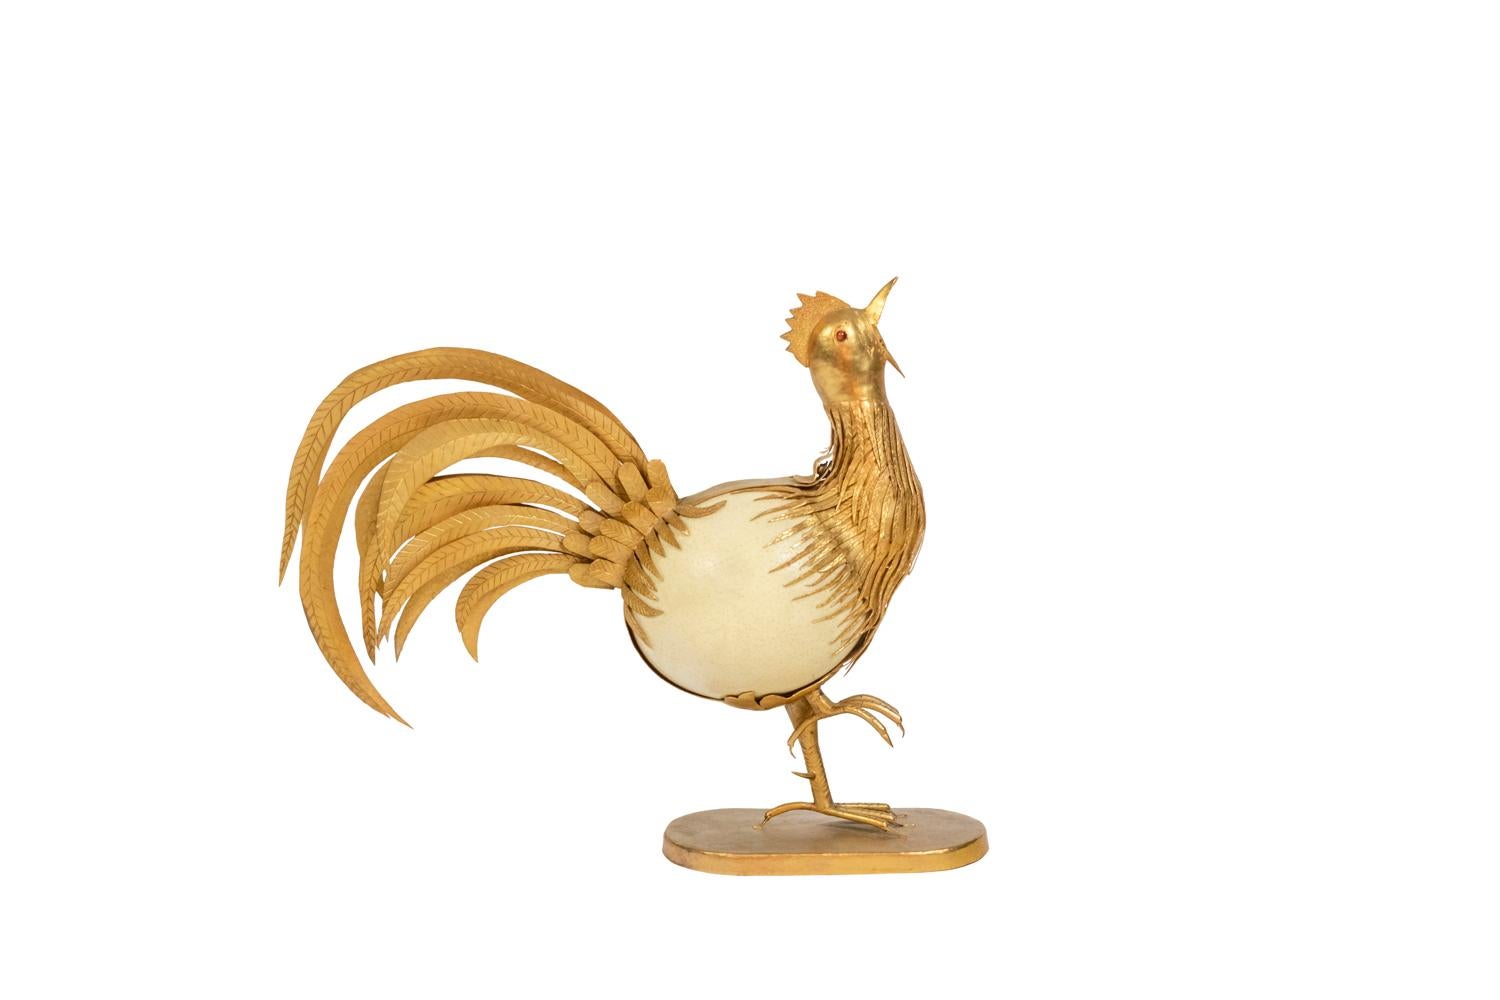 Rooster realized from an ostrich egg, and in gilded brass, beak open and right leg raised. Red colored eyes. Oblong base.

French or Italian craftsmanship realized in the 1970s.